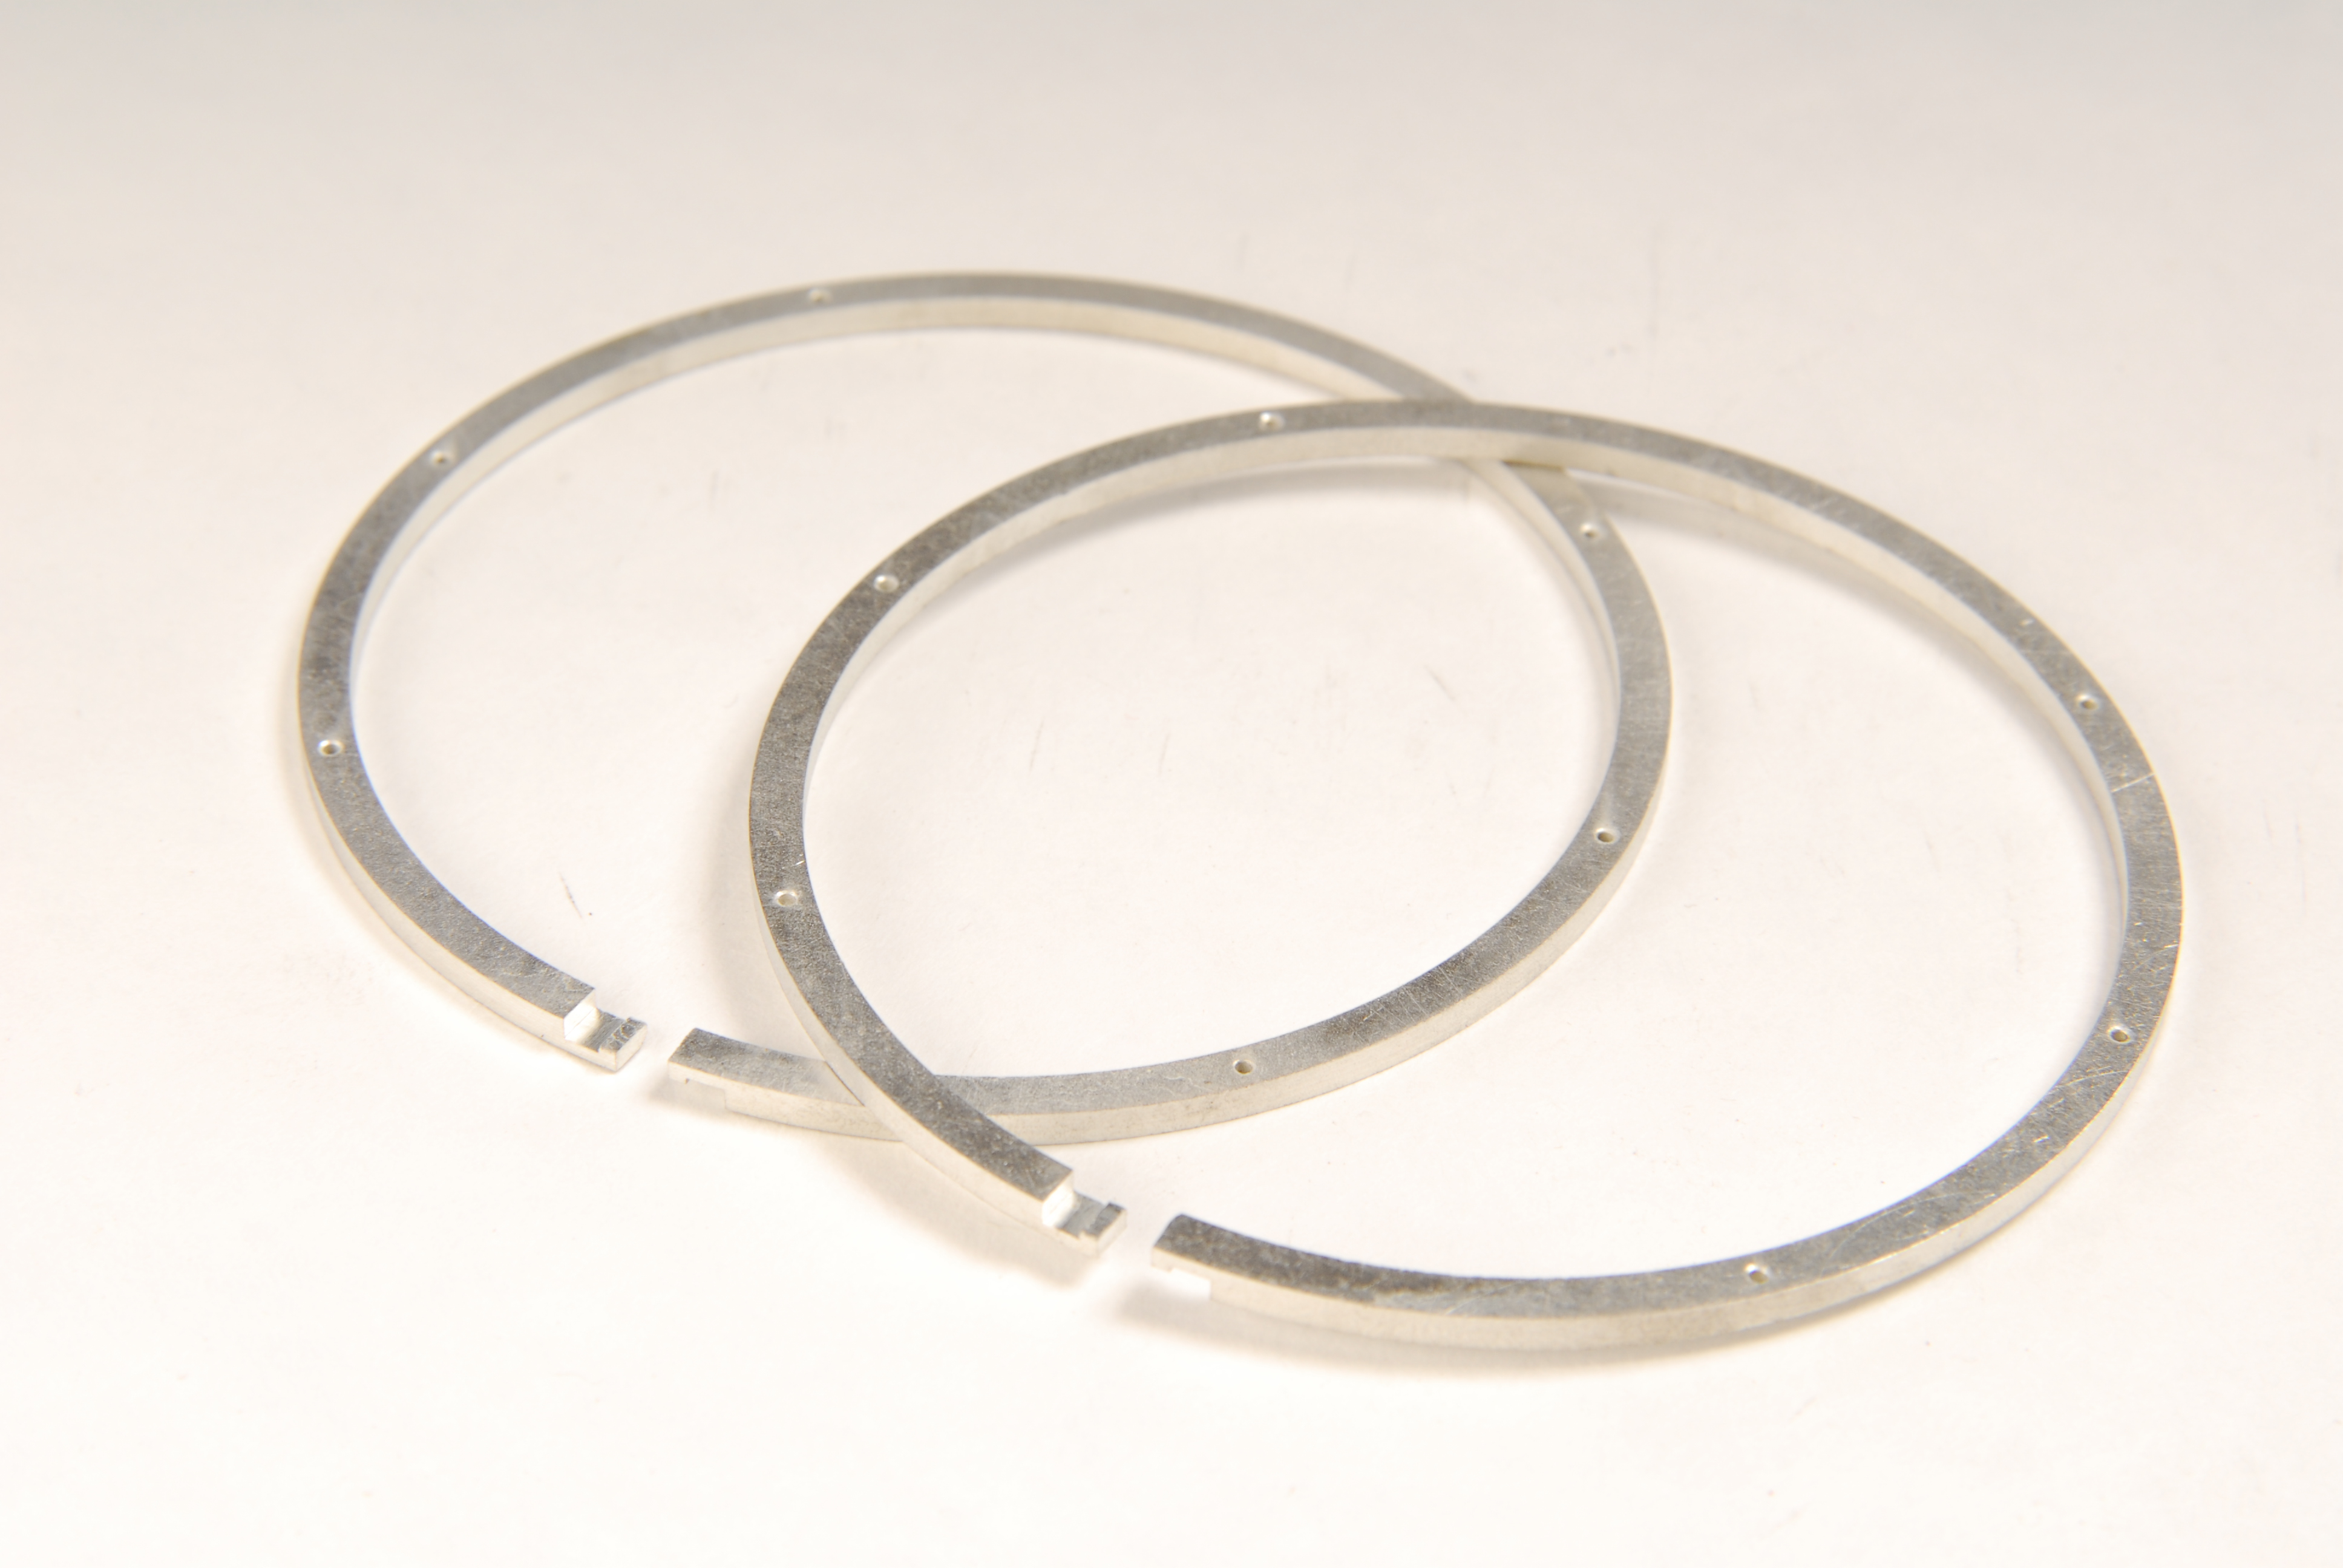 3-916 NBR - O-Rings, Seals and Retaining Rings for Industrial Fittings